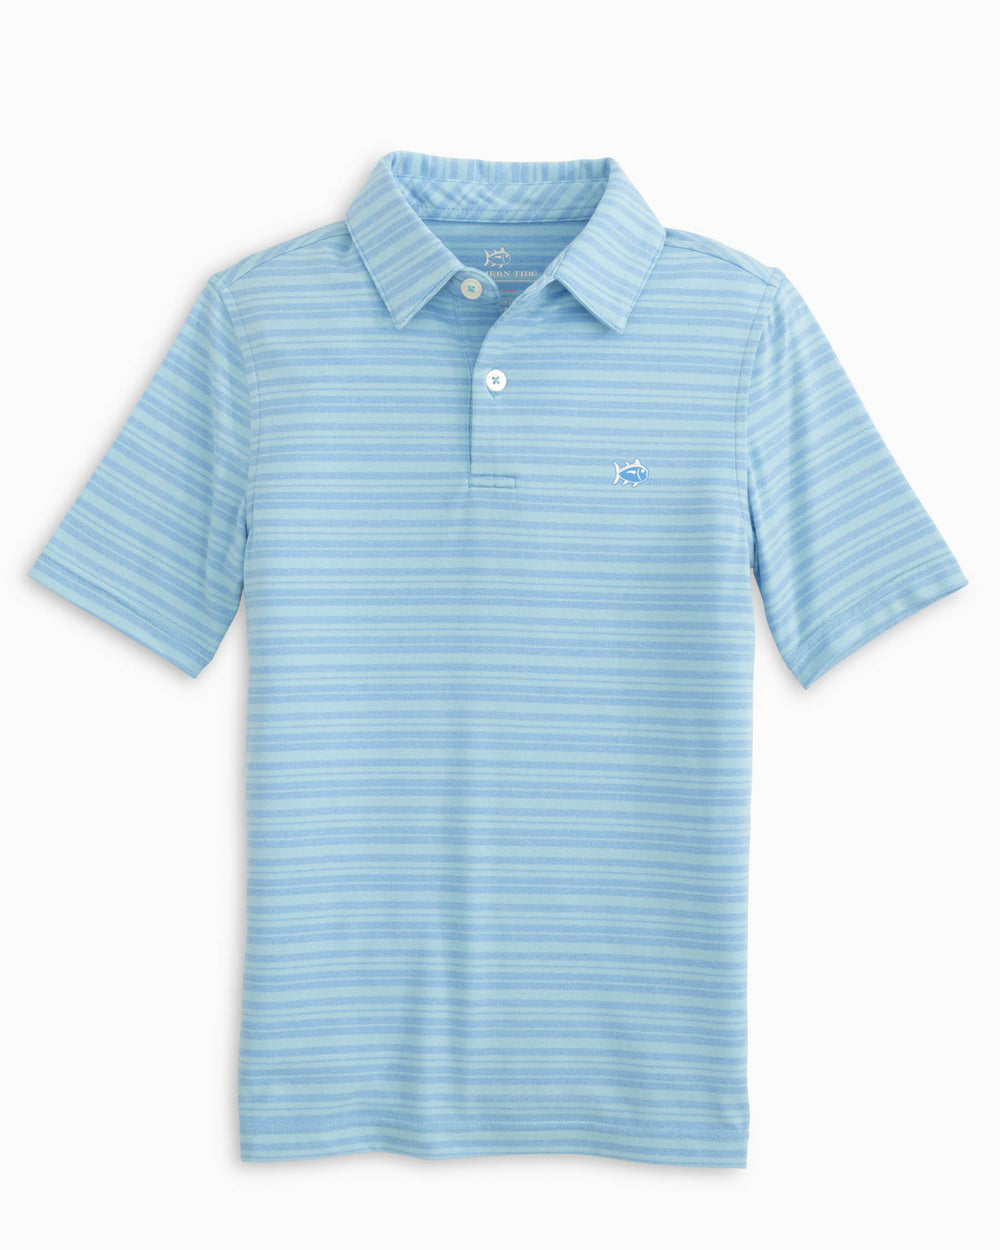 The front view of the Southern Tide Youth Ryder Heather Bombay Stripe Performance Polo Shirt by Southern Tide - Heather Boat Blue